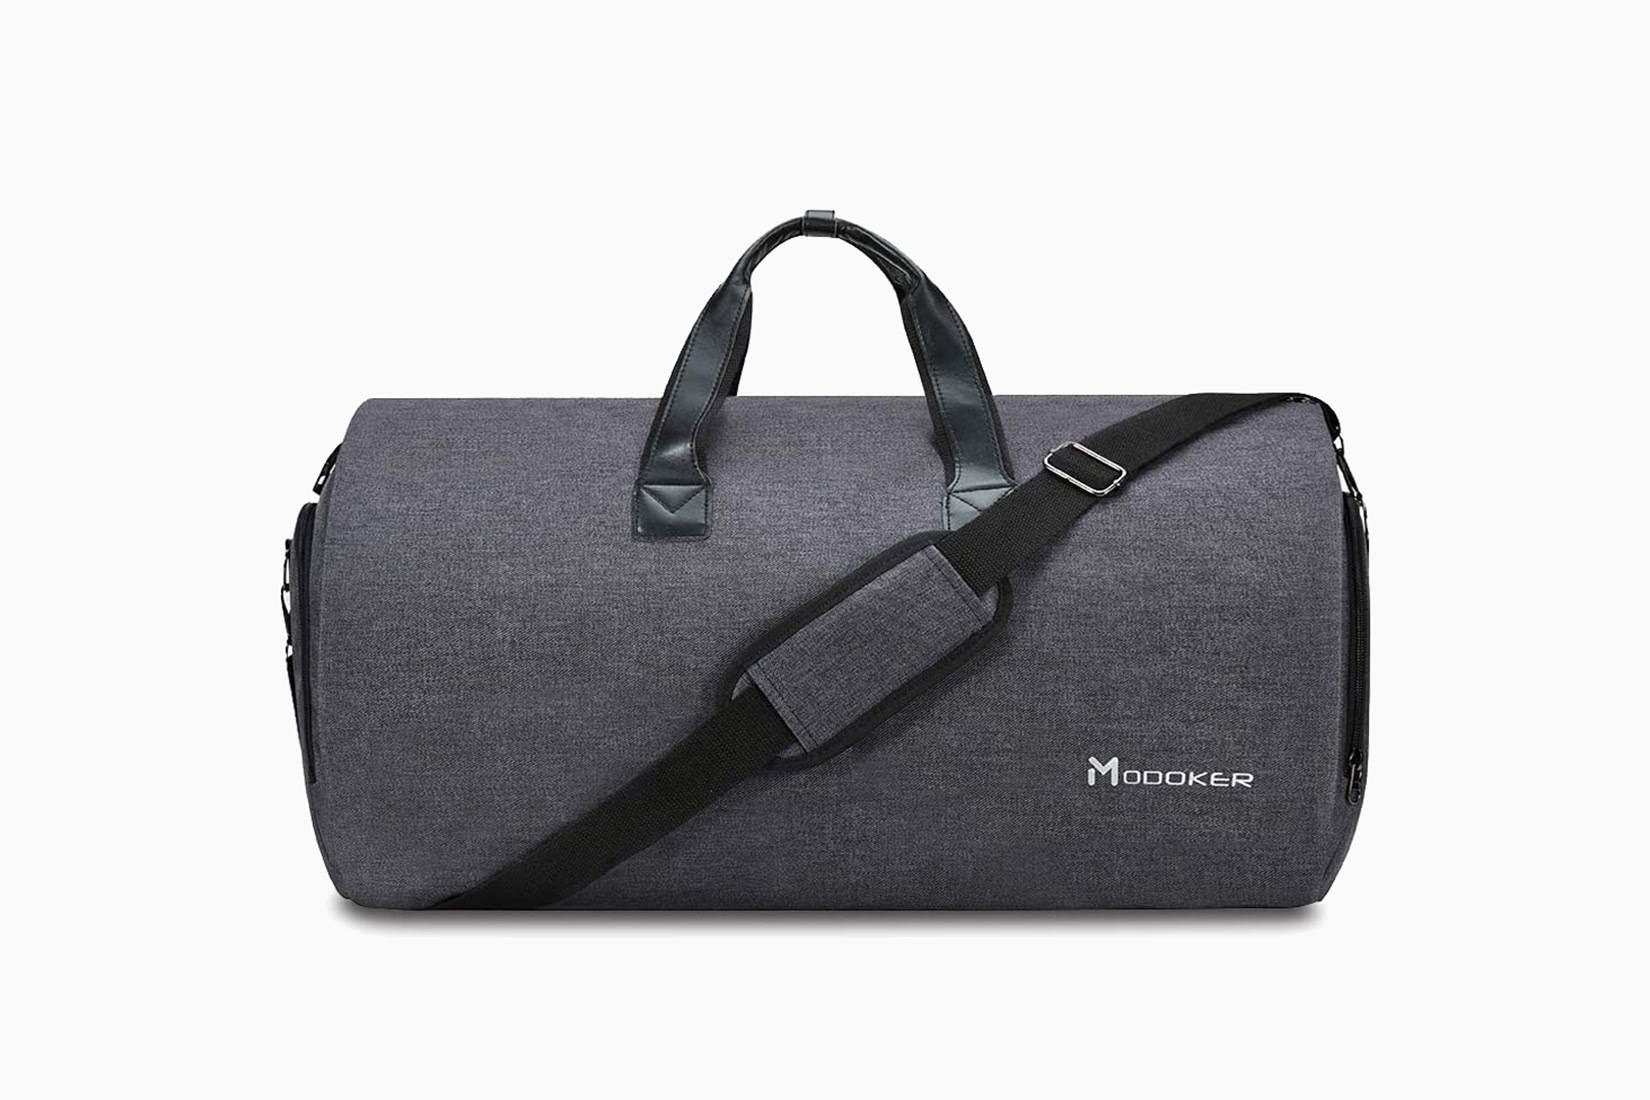 Black Suit Travel Bag Men and Women Suit Travel Bag Carrier Luggage with Shoe Pouch and Detachable Shoulder Strap Carry on Garment Bag for Travel or Sport 